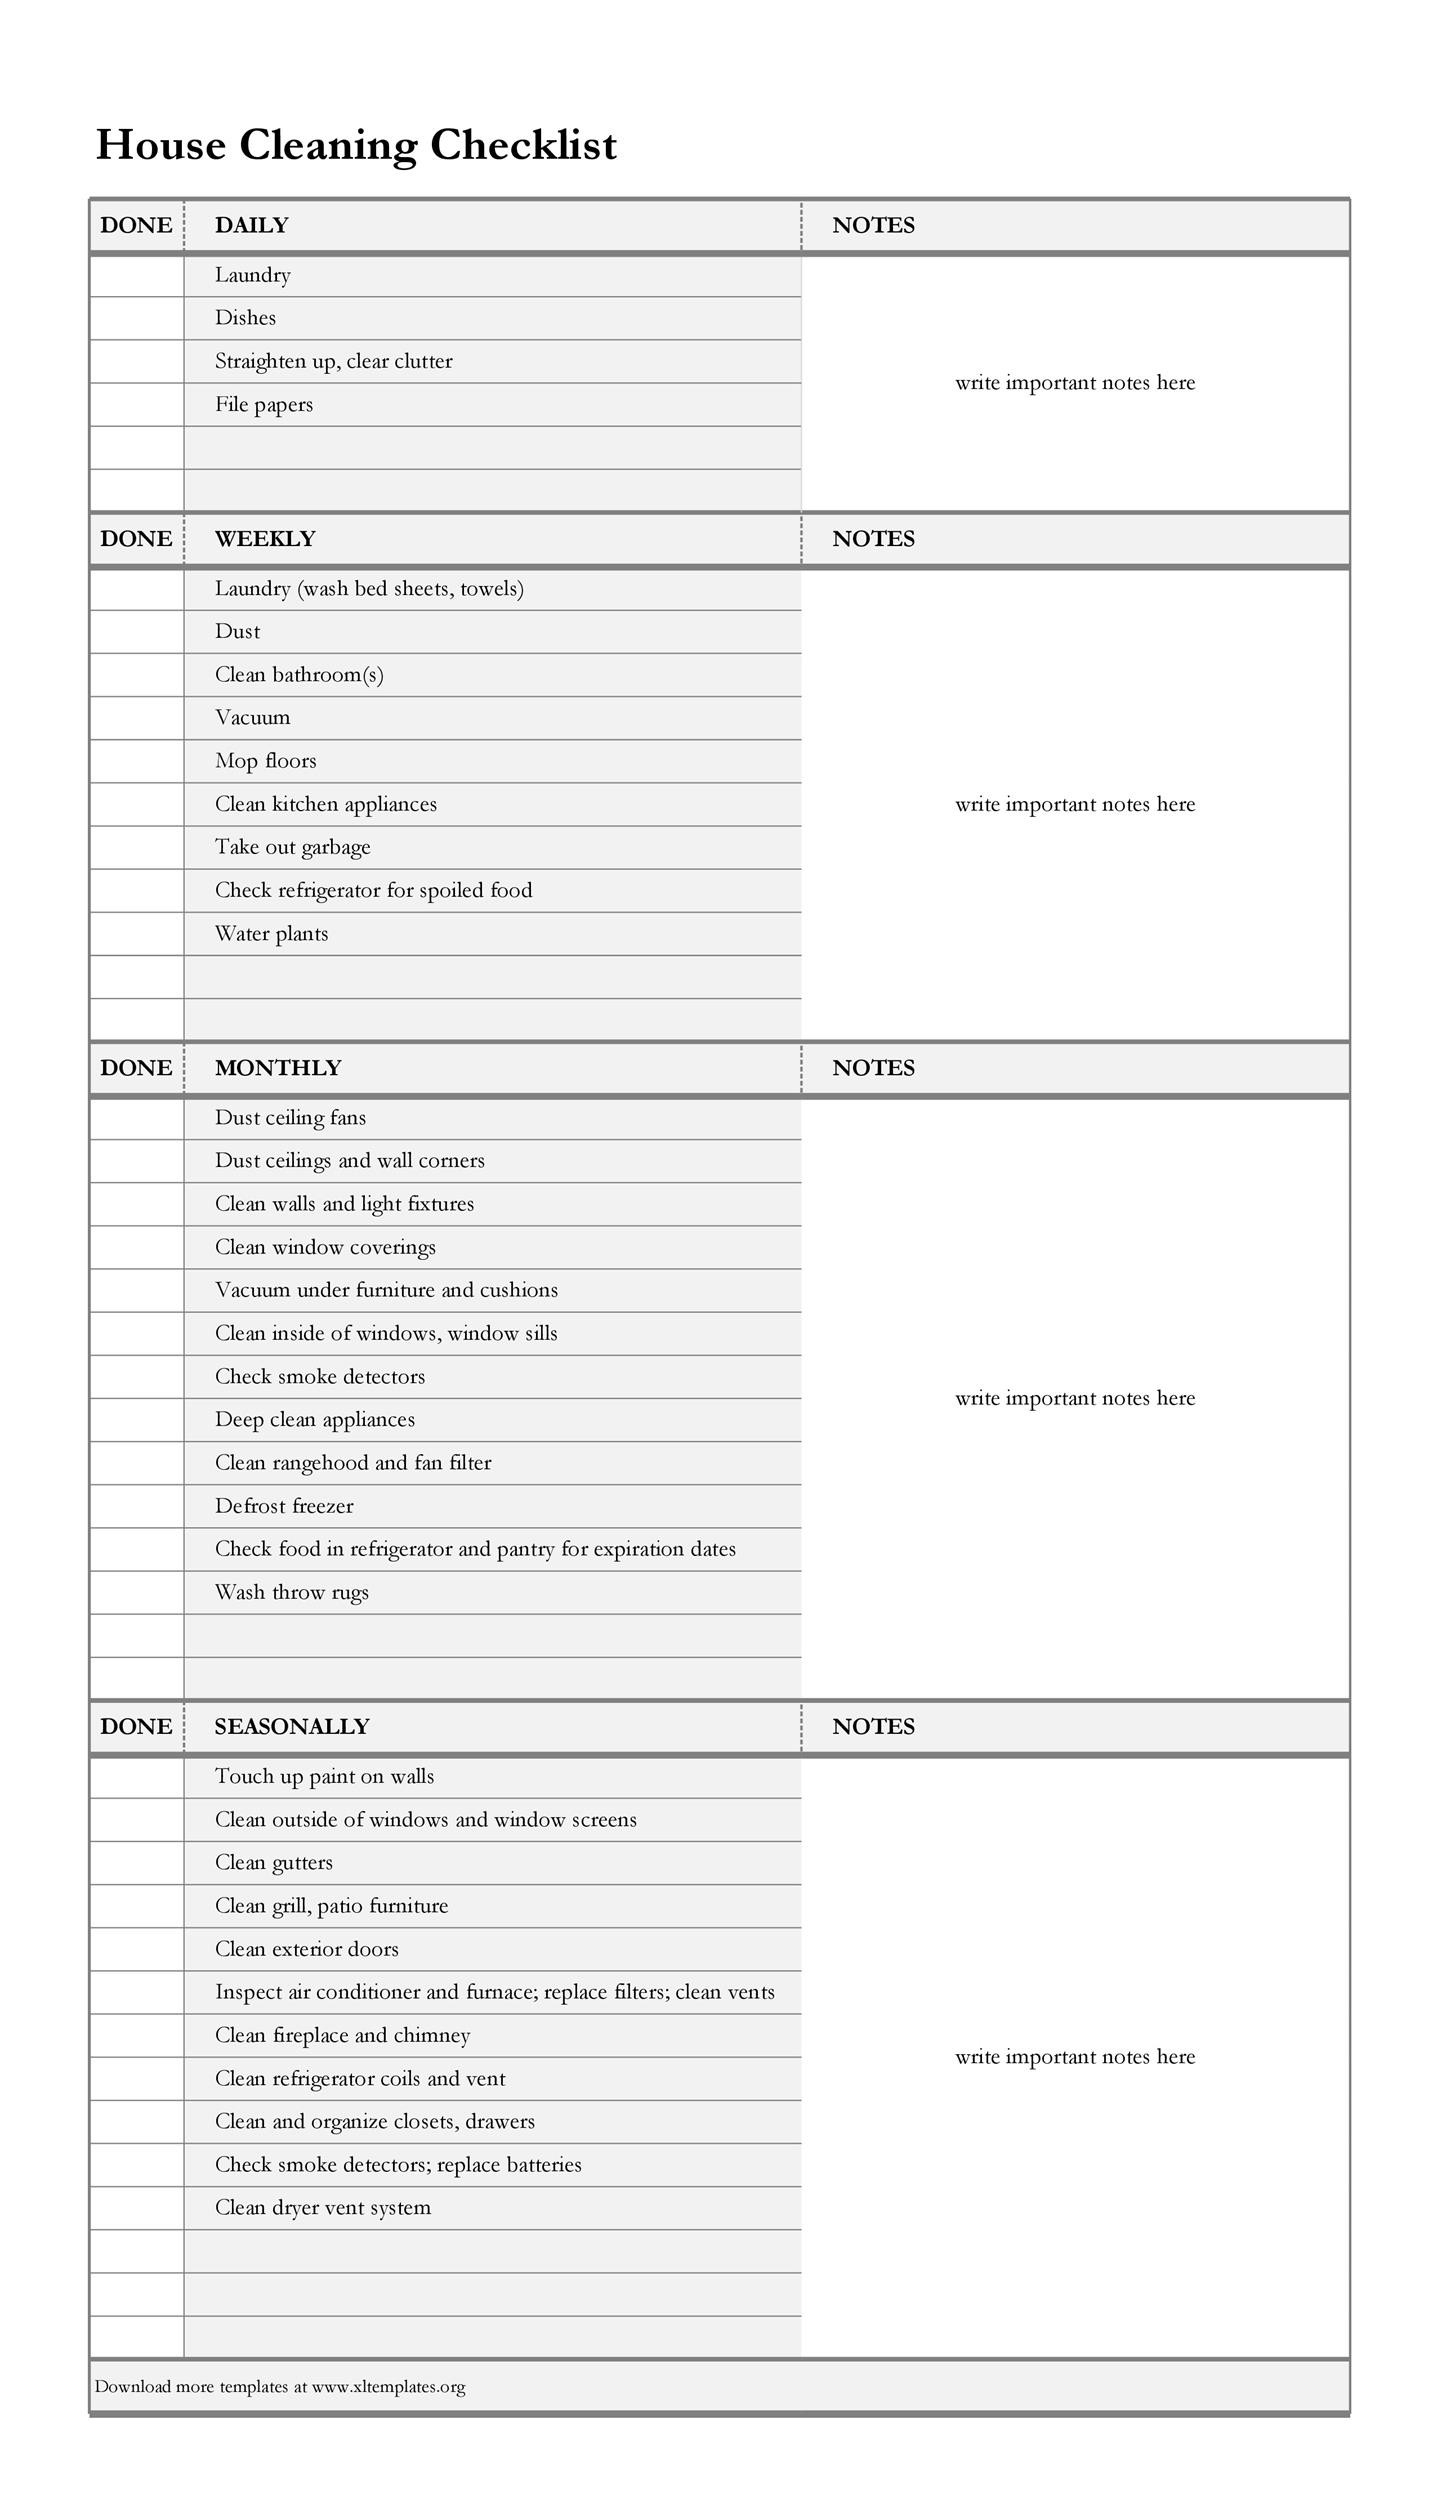 10 Printable House Cleaning Checklist Templates ᐅ TemplateLab Pertaining To Home Cleaning Checklist Template In Home Cleaning Checklist Template